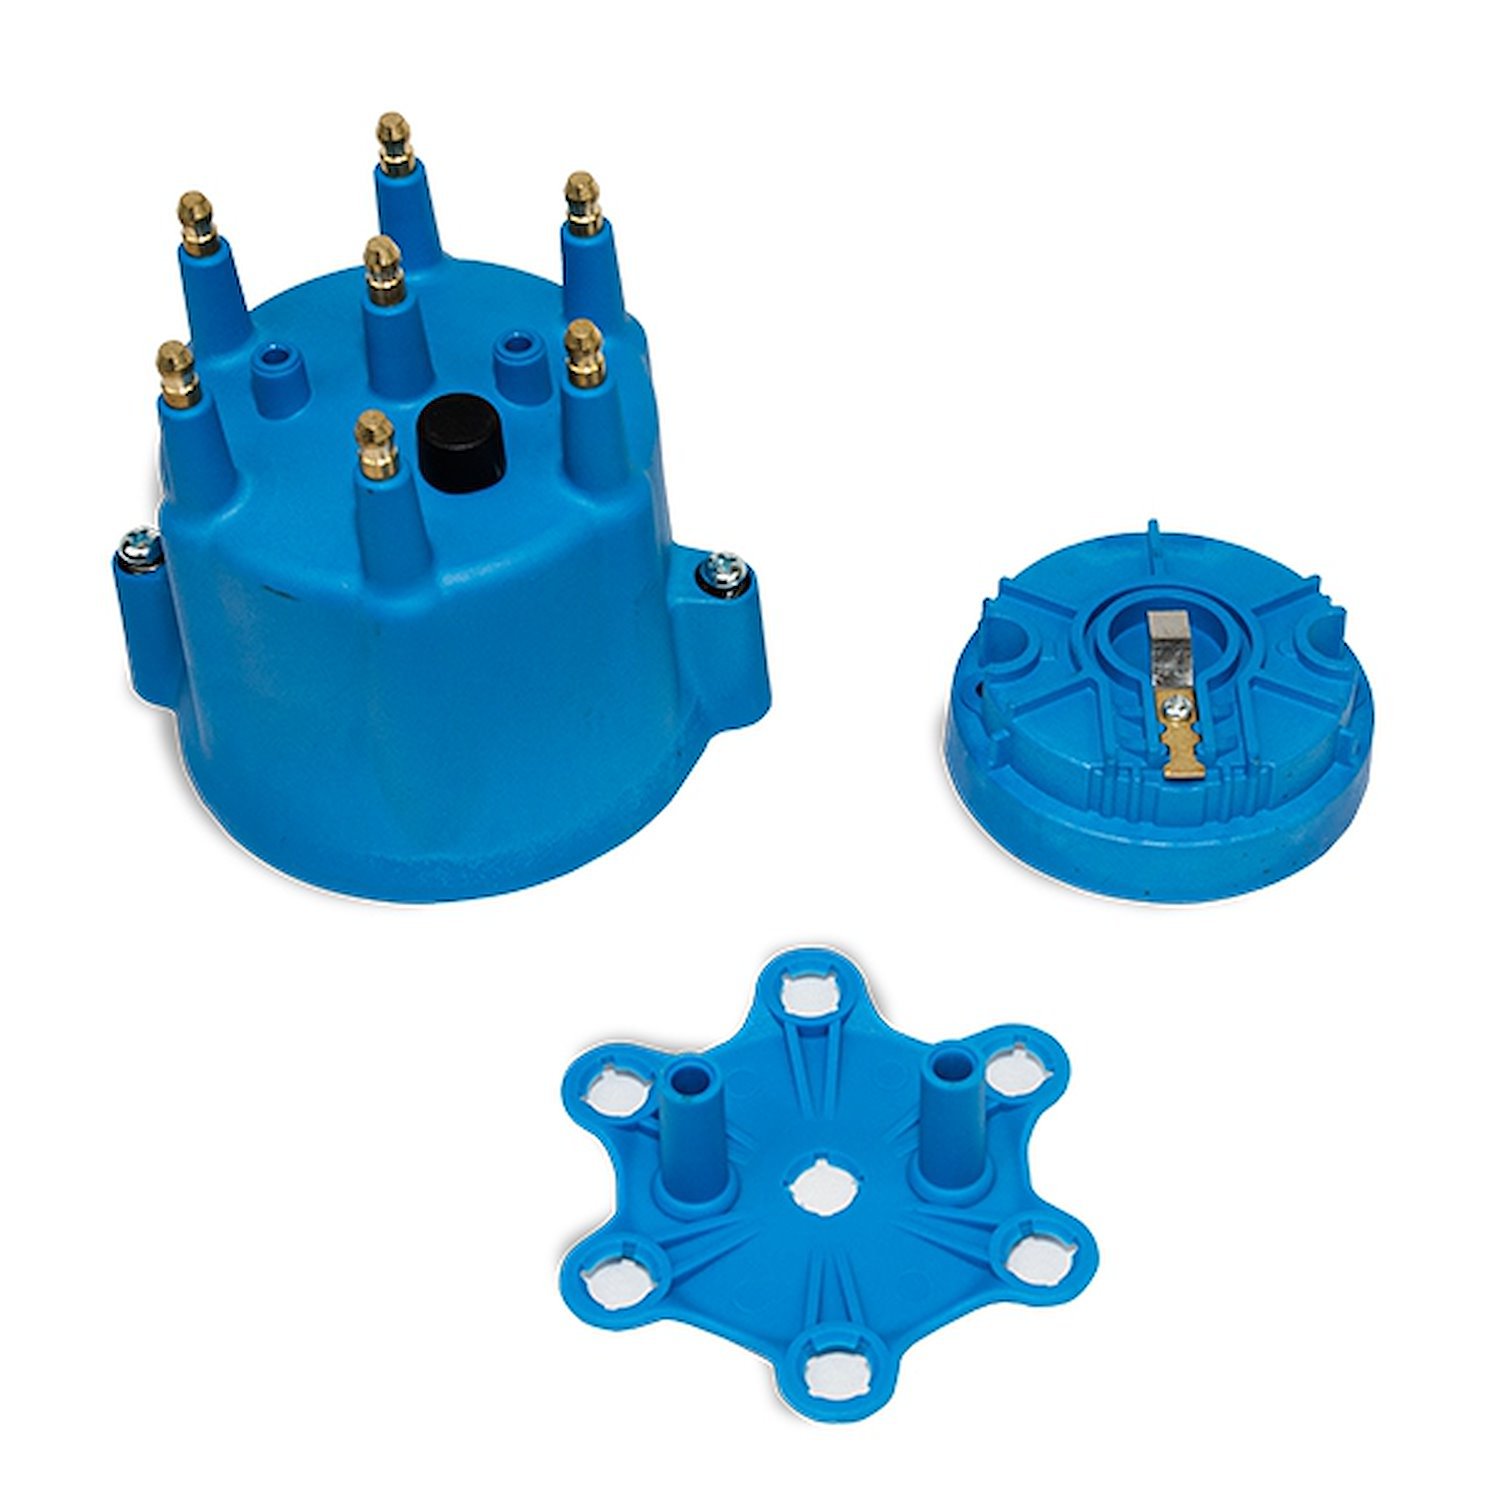 JM6975BL Pro Series Distributor Cap and Rotor Kit, 6 Cylinder Male, Blue